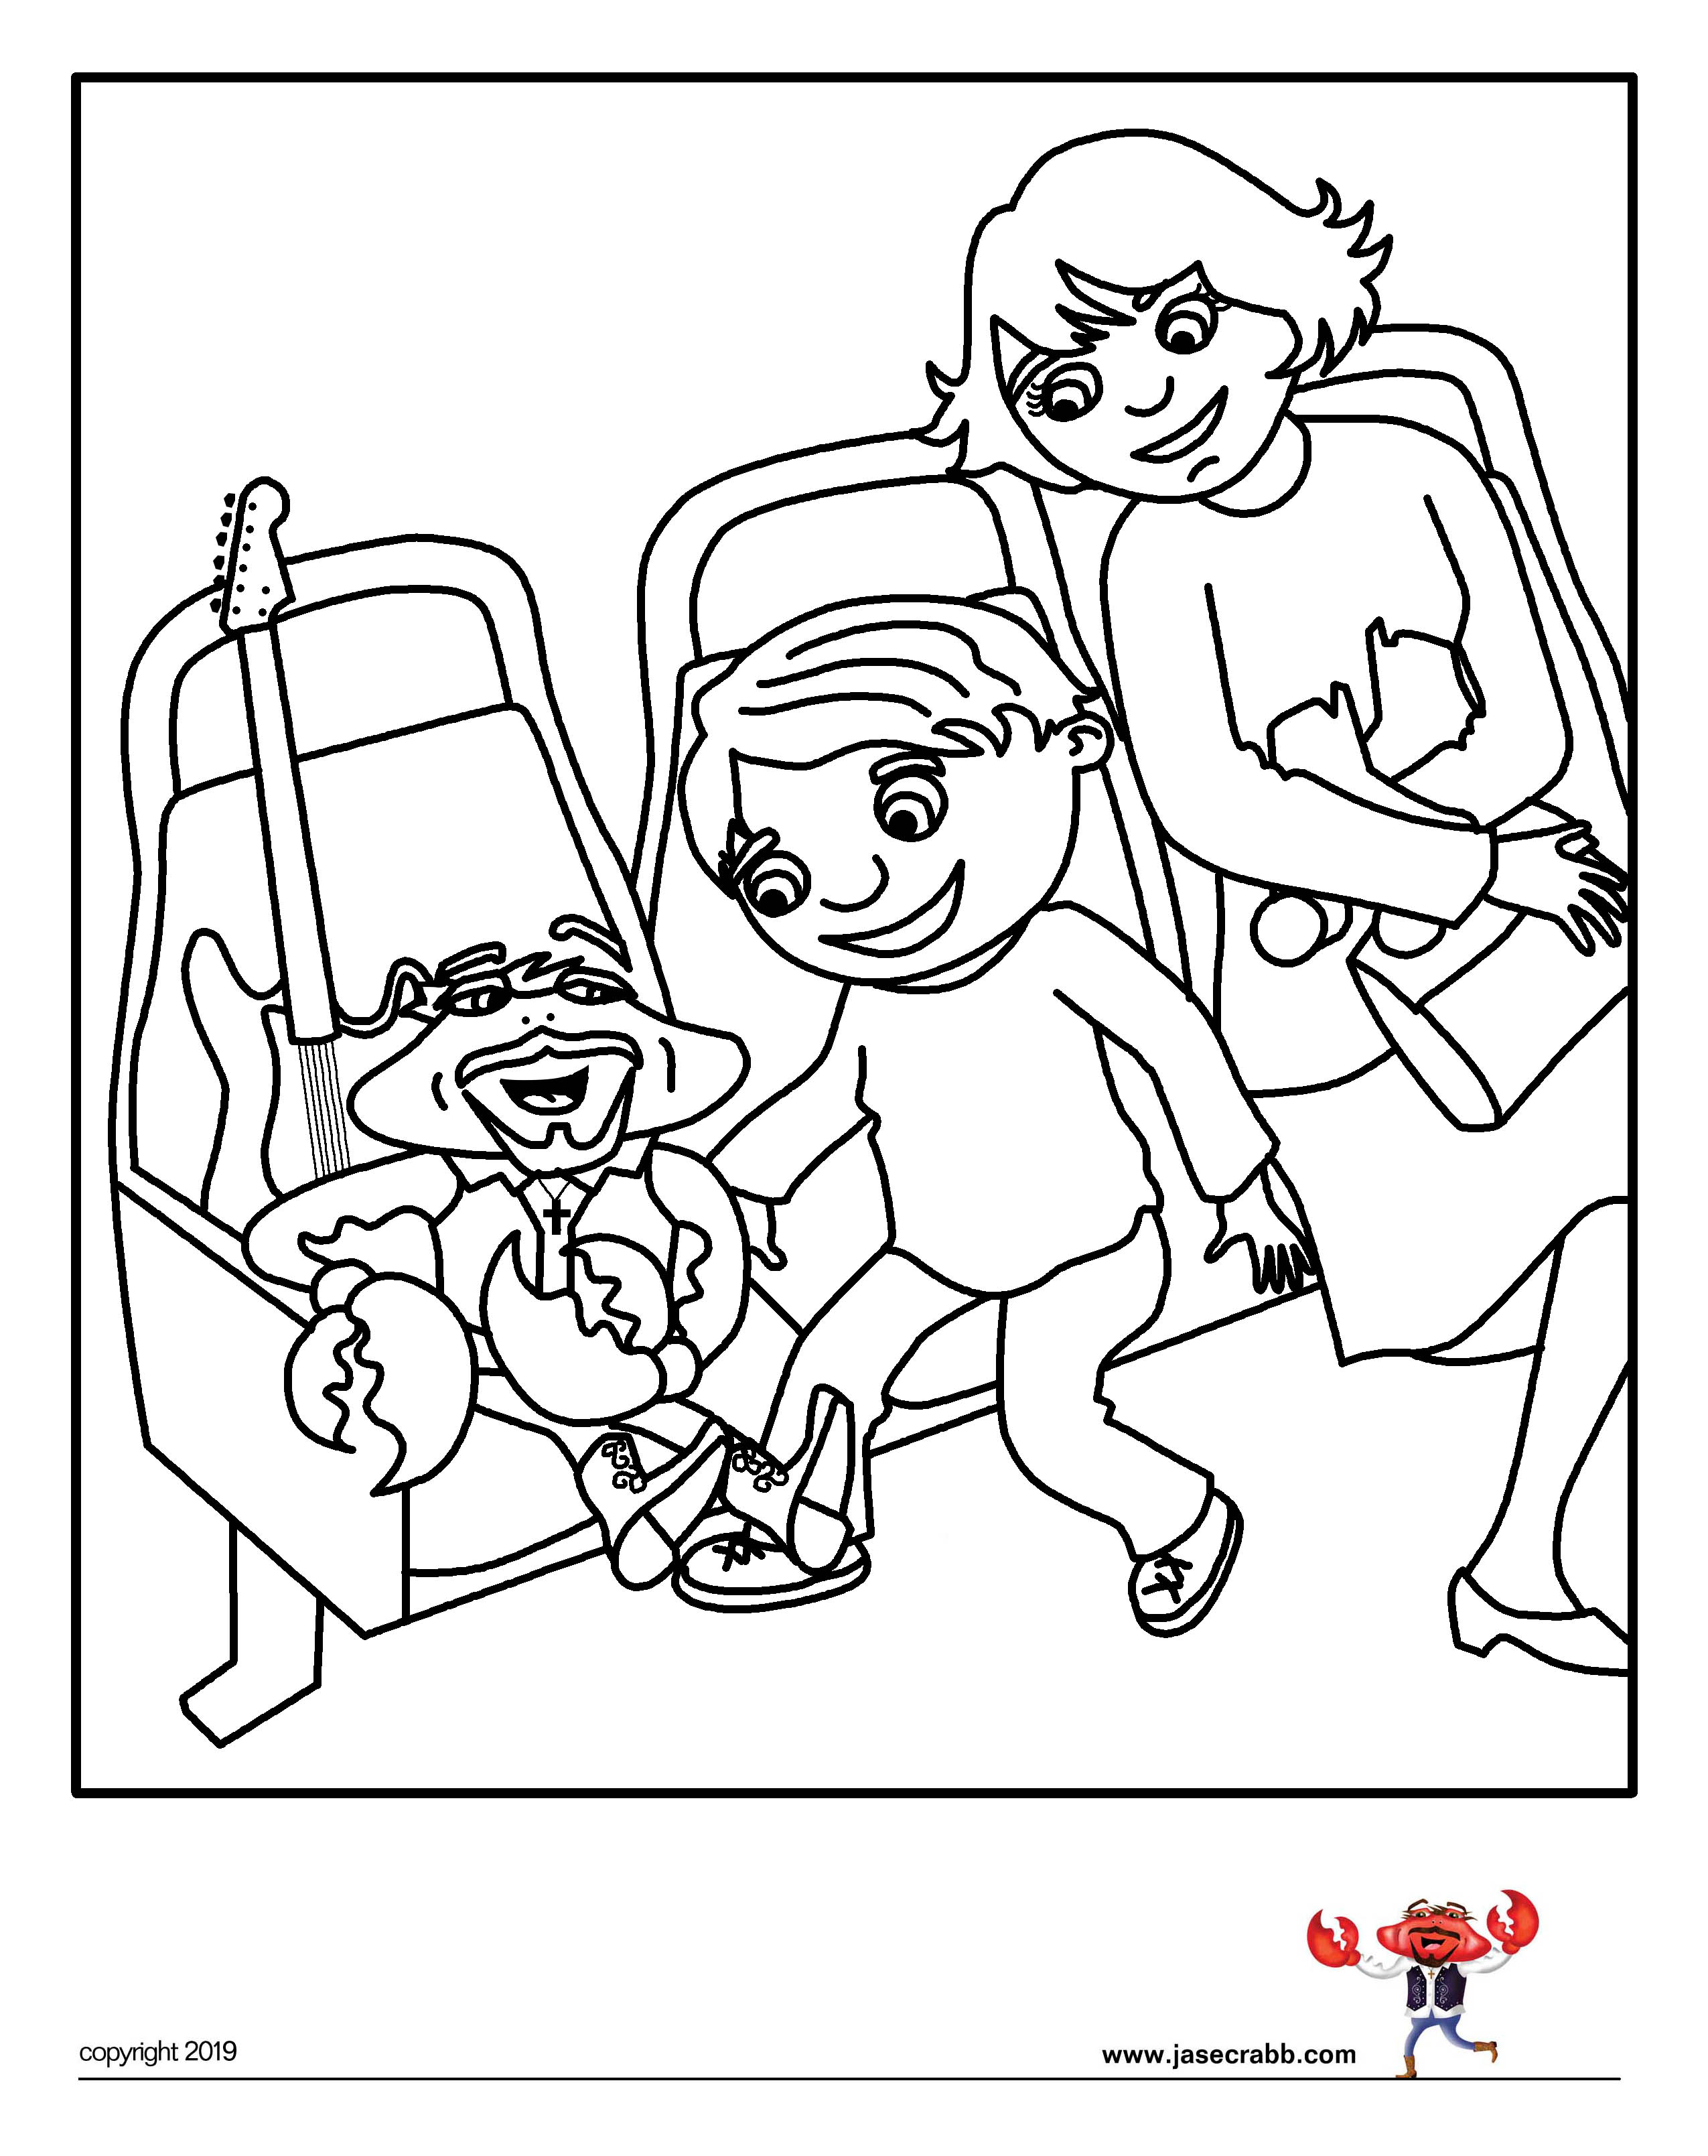 Jase Crabb Coloring Page